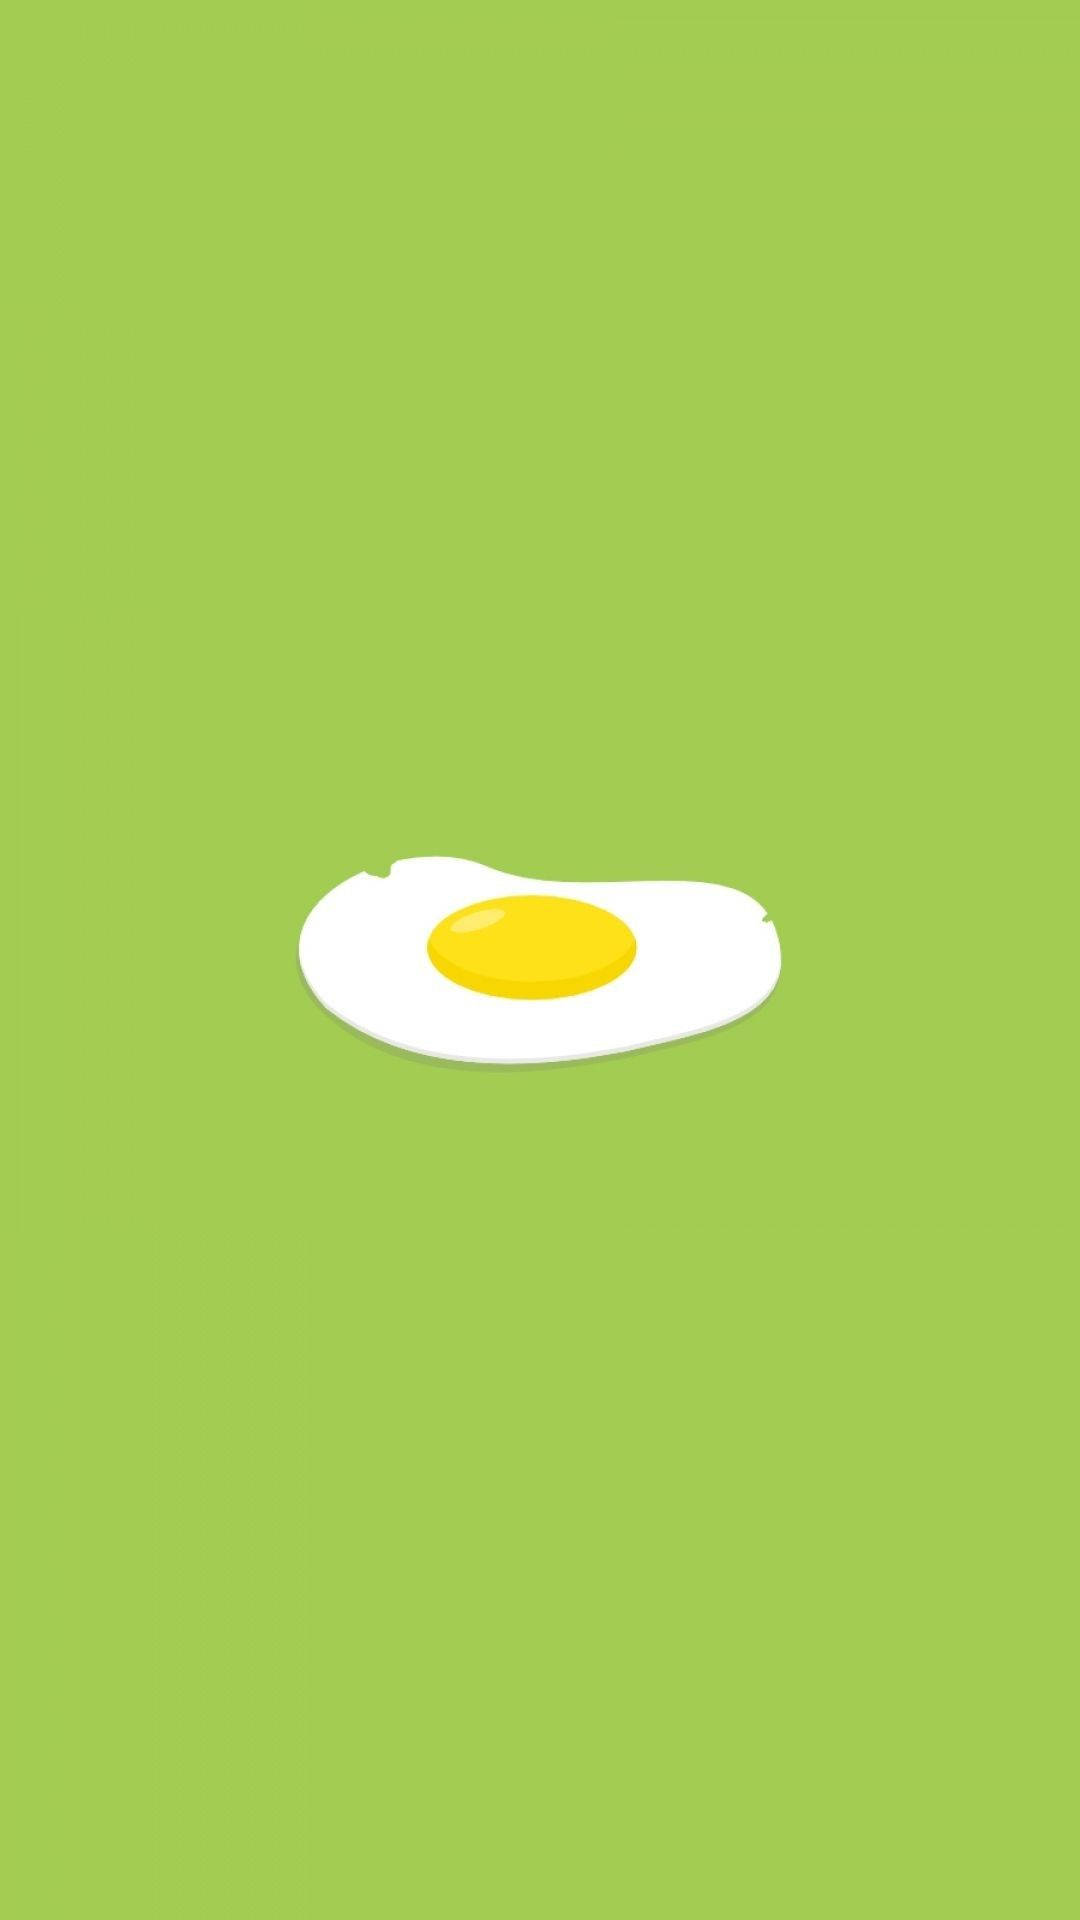 Sunny Side Up Simple Iphone Wallpaper